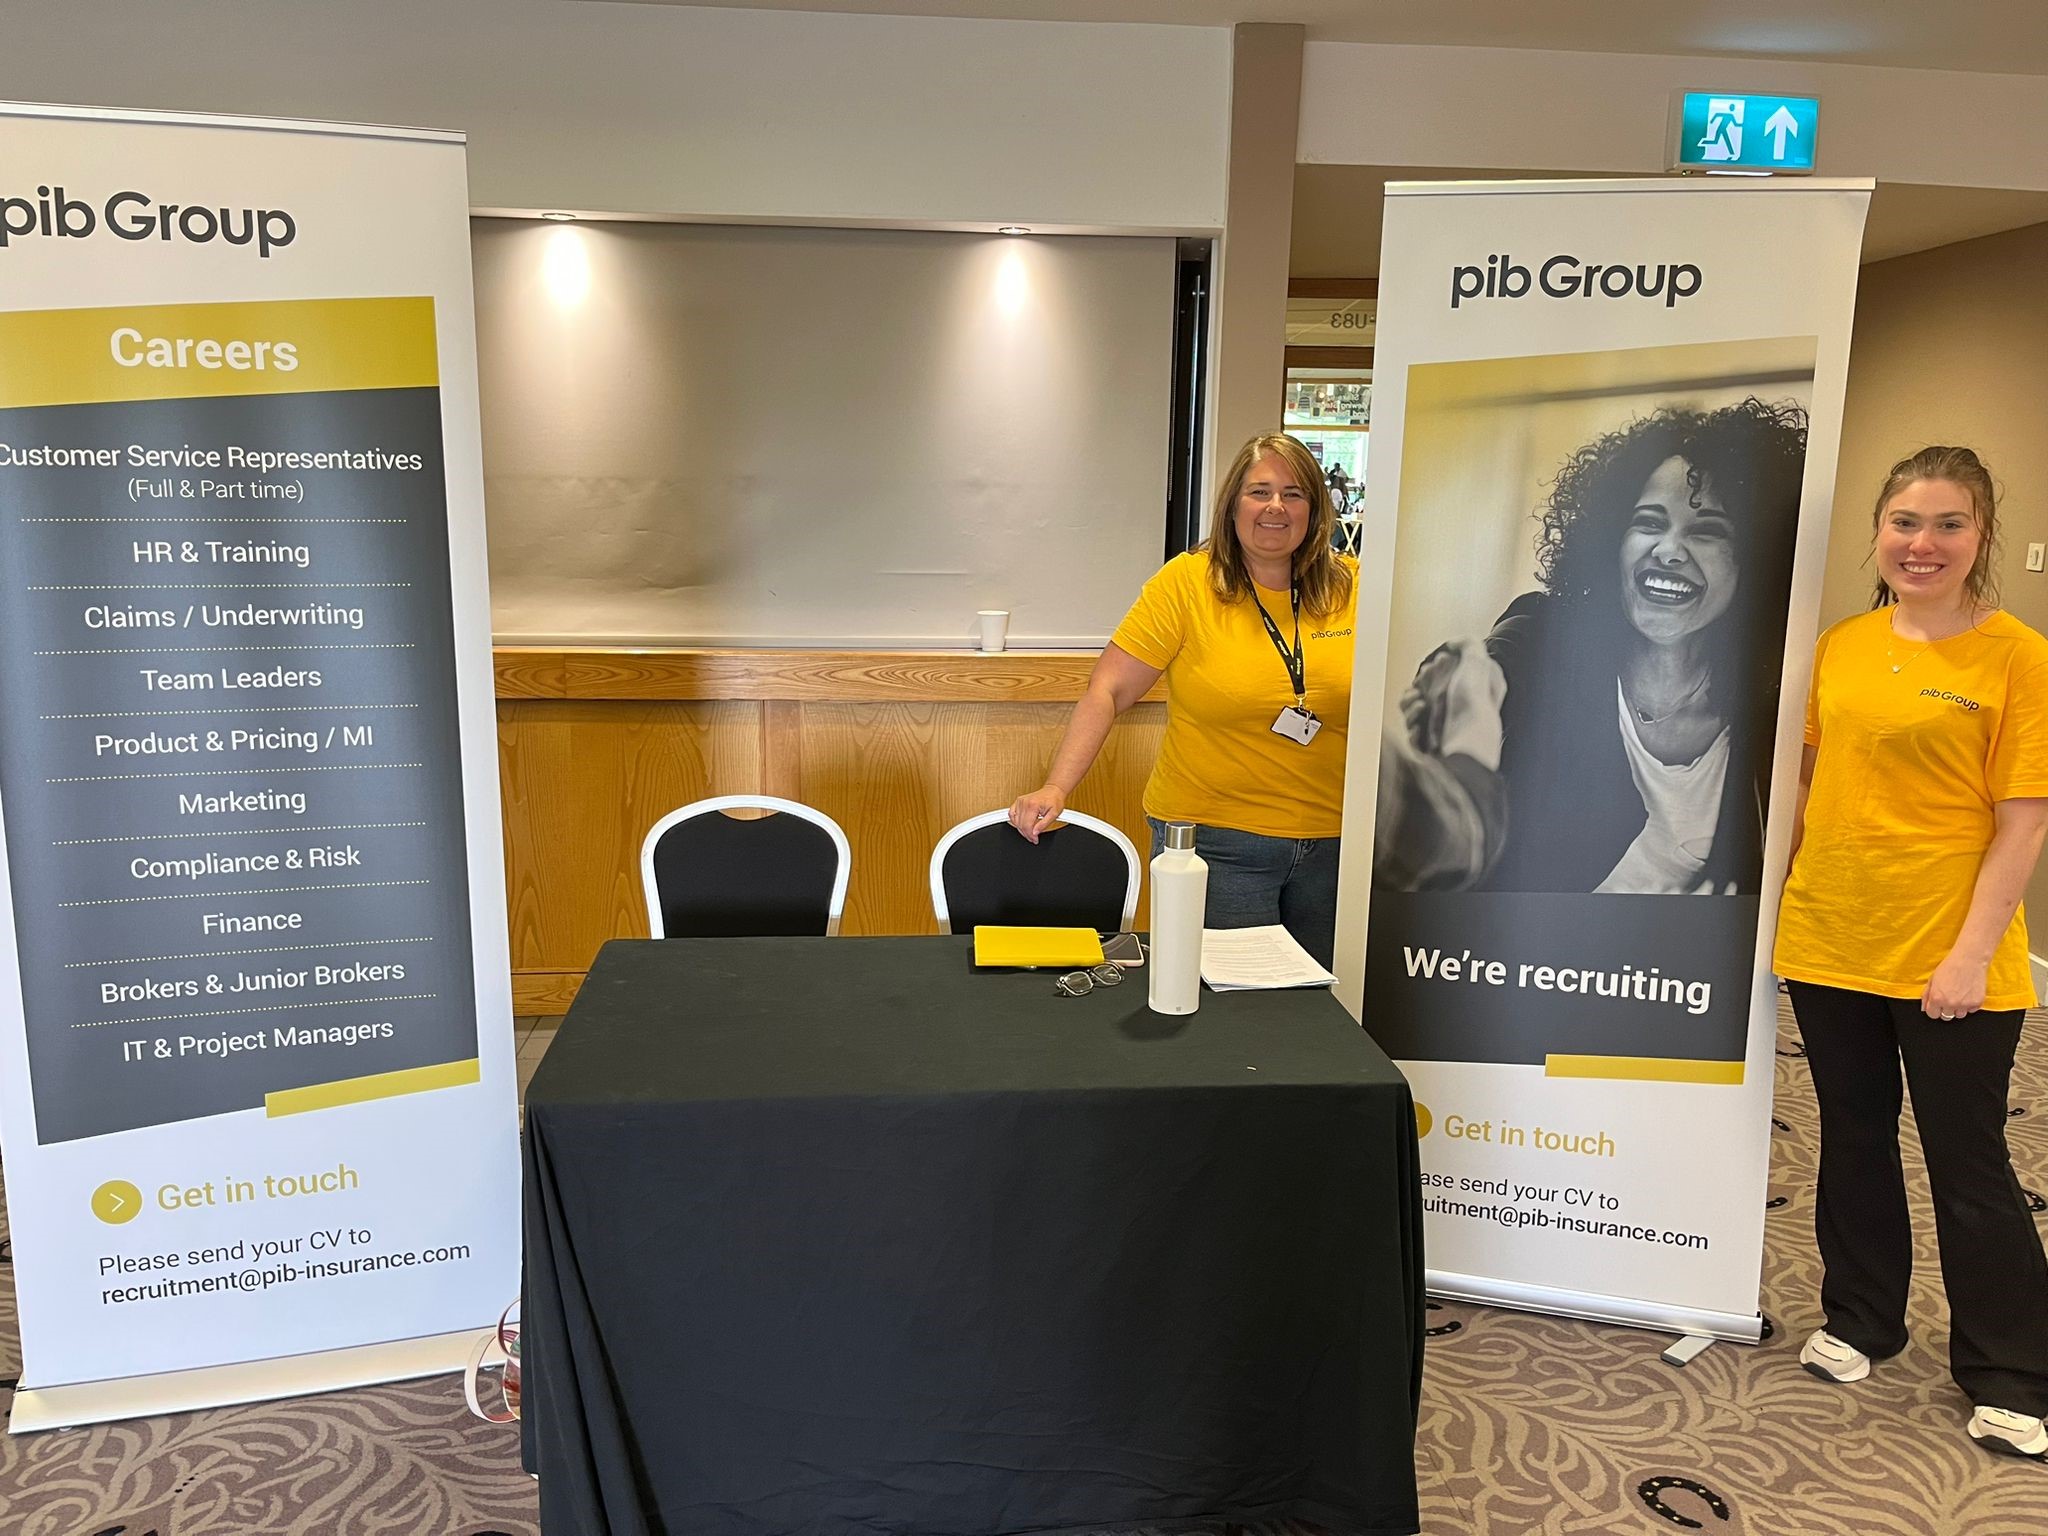 PIB Group at our event in Cheltenham & Gloucester